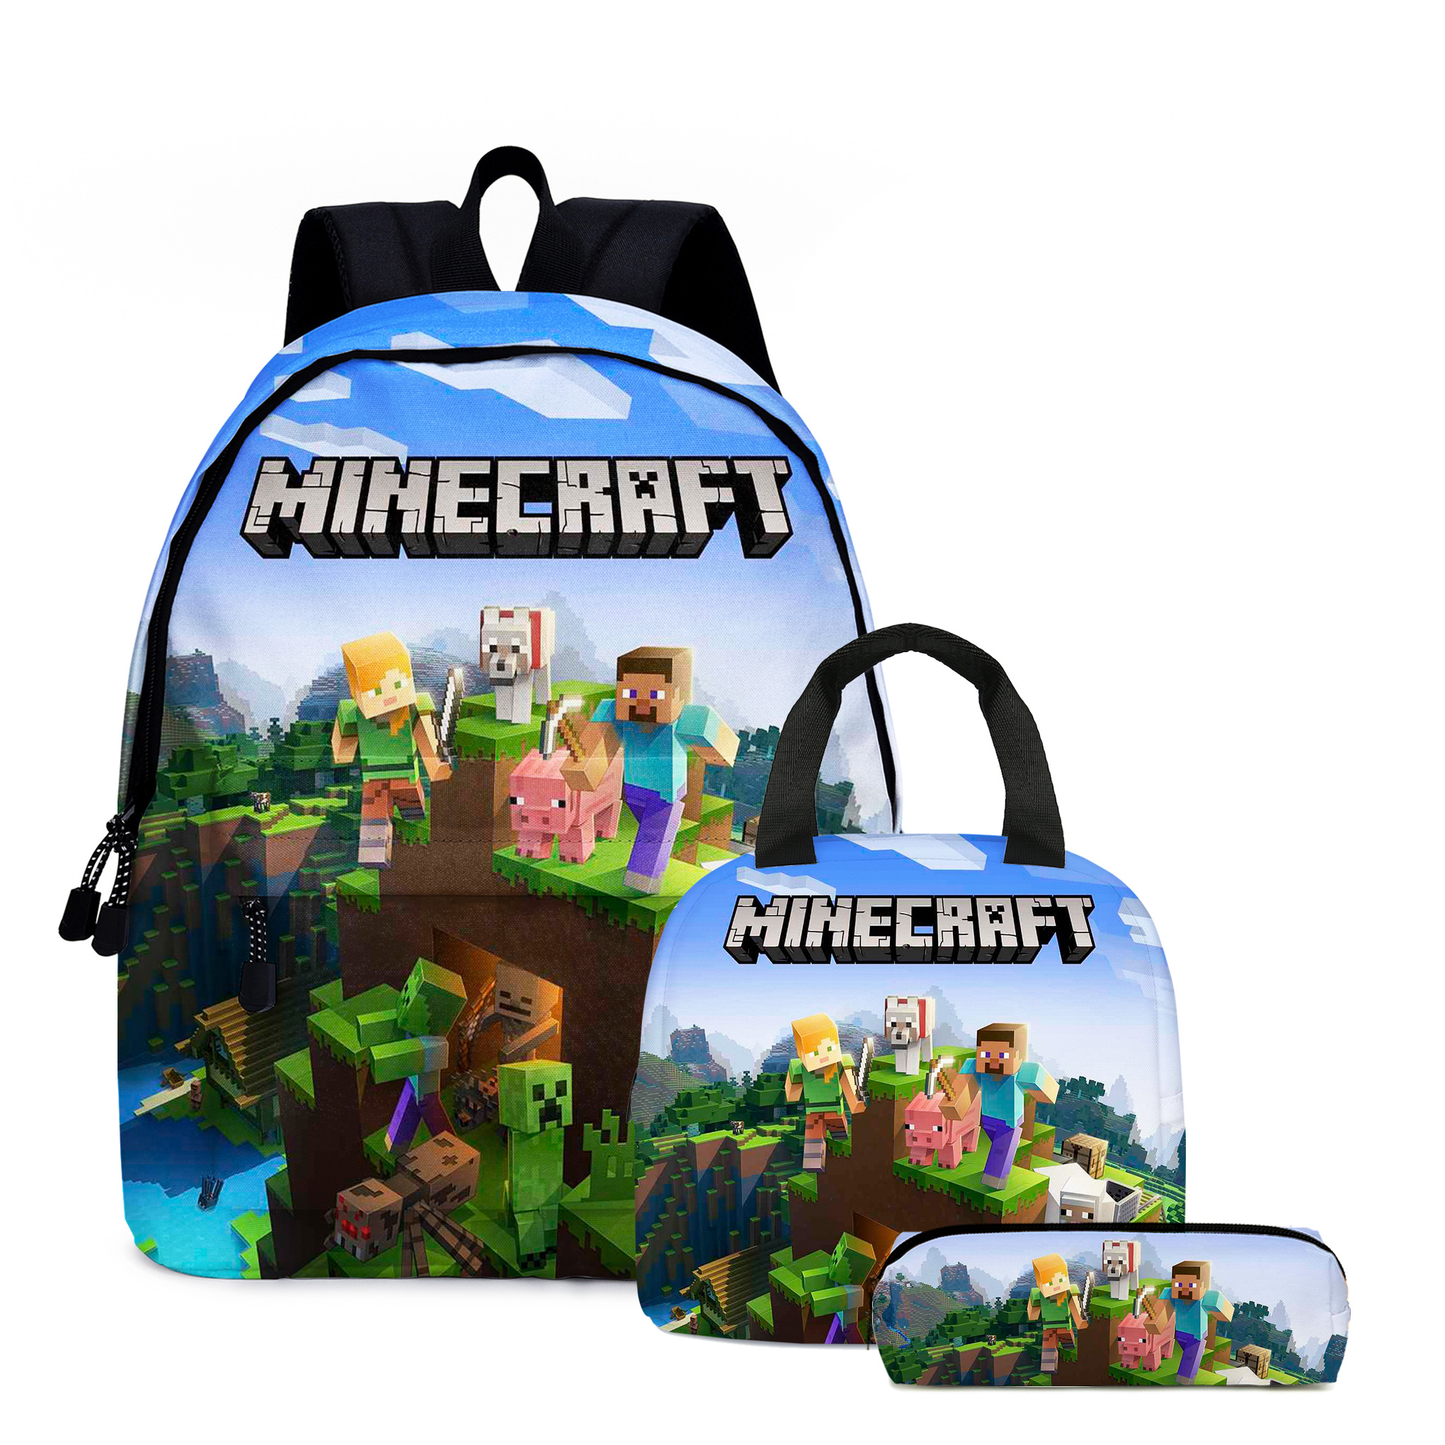 Double sided print Minecraft 2nd Edition  set (3PC) (17 inch size)